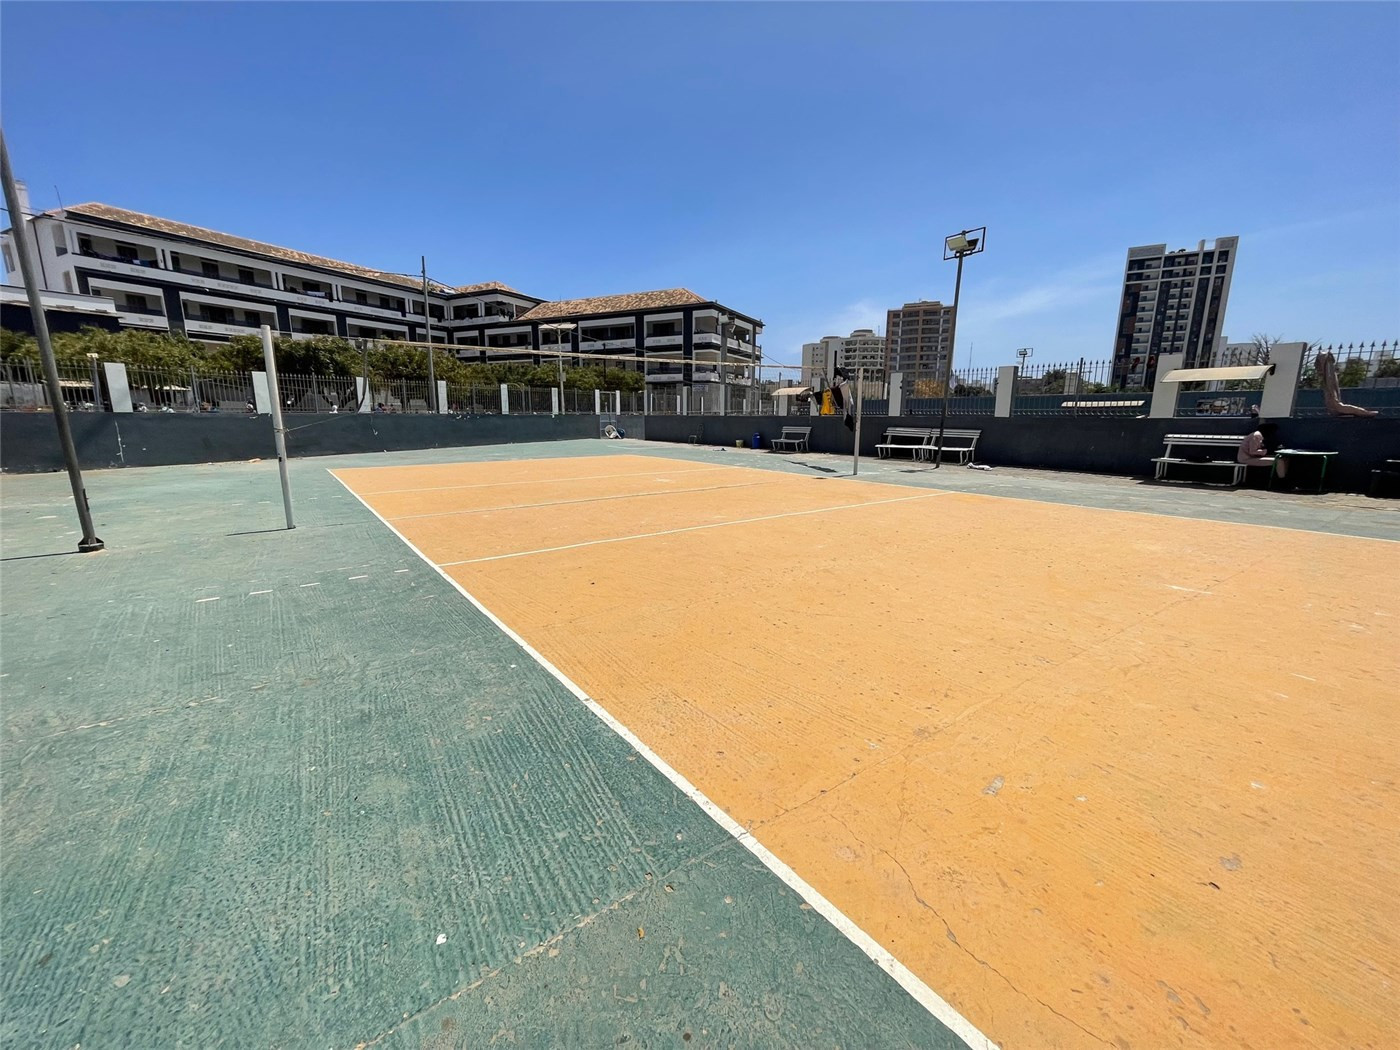 The delegation visited the location where a new outdoor volleyball court is set to be installed with funding provided by the FIVB ©FIVB